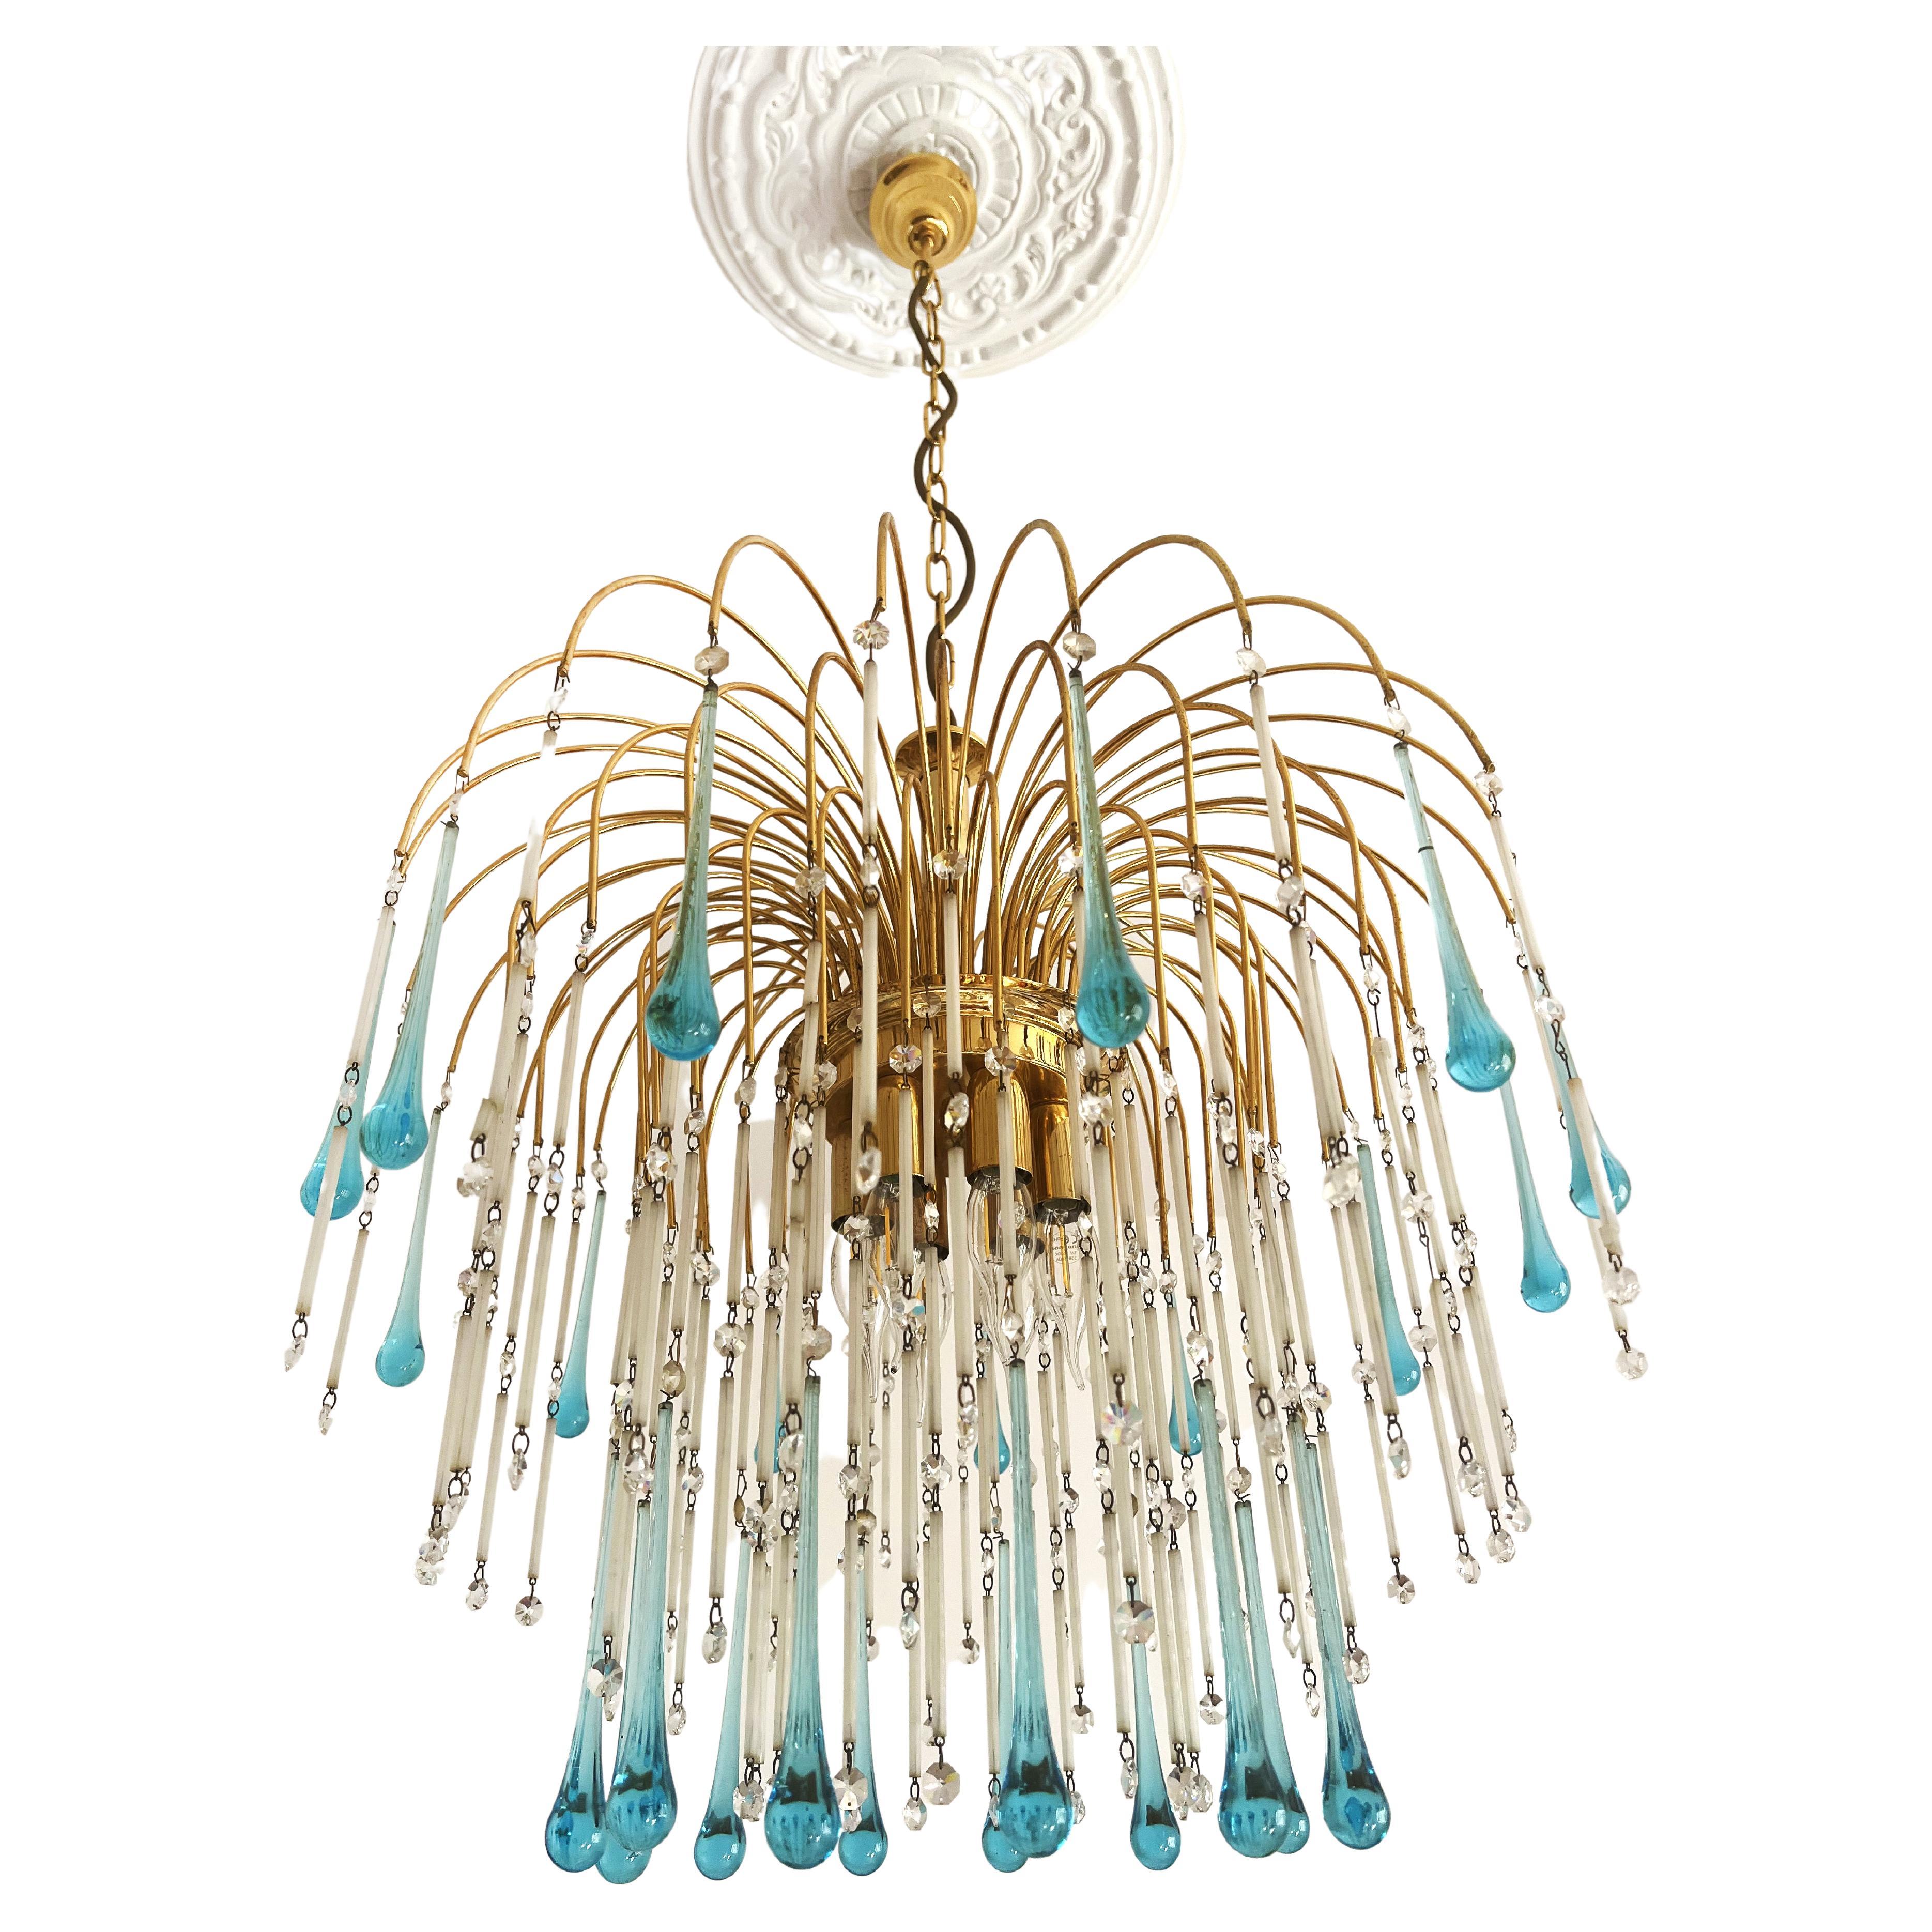 Fascinating Murano chandelier inspired by the divine Greta Garbo whose tears, legend has it, were the same color as her eyes